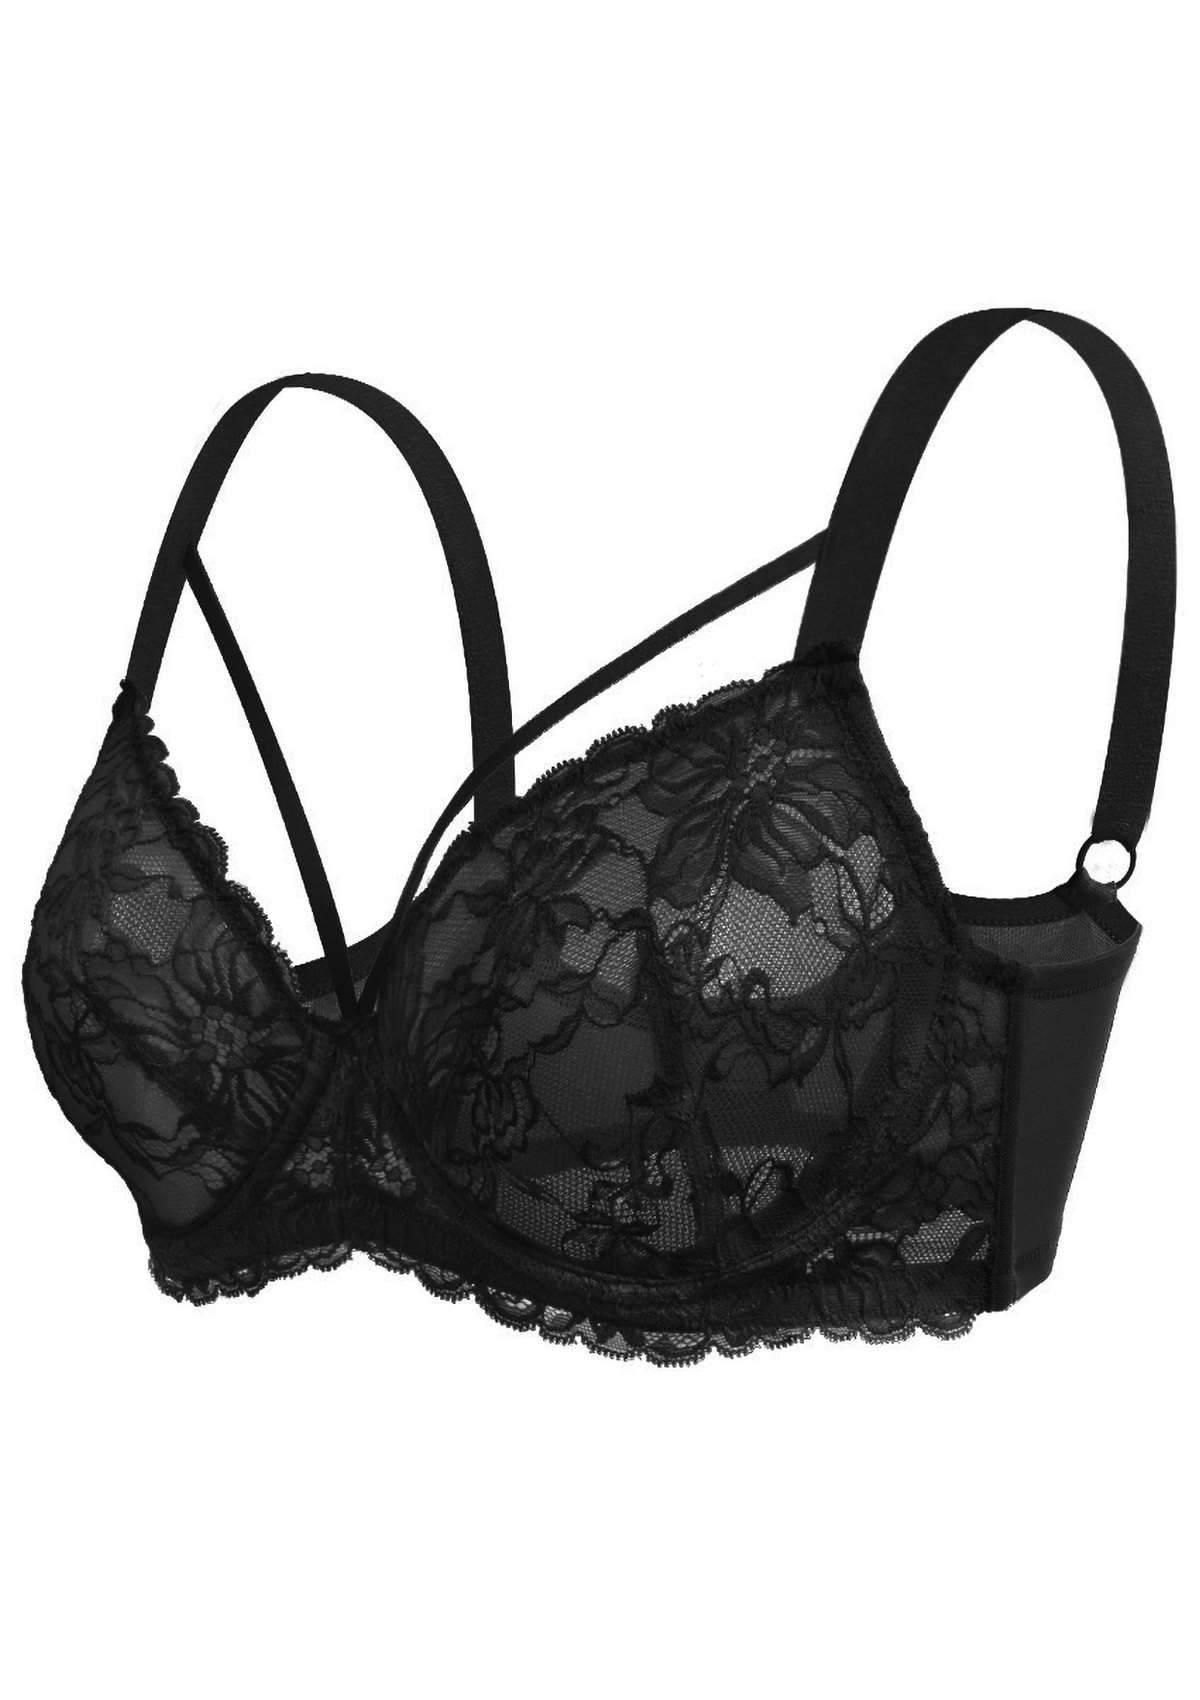 HSIA Pretty In Petals Bra - Plus Size Lingerie For Comfrot And Support - Black / 44 / B